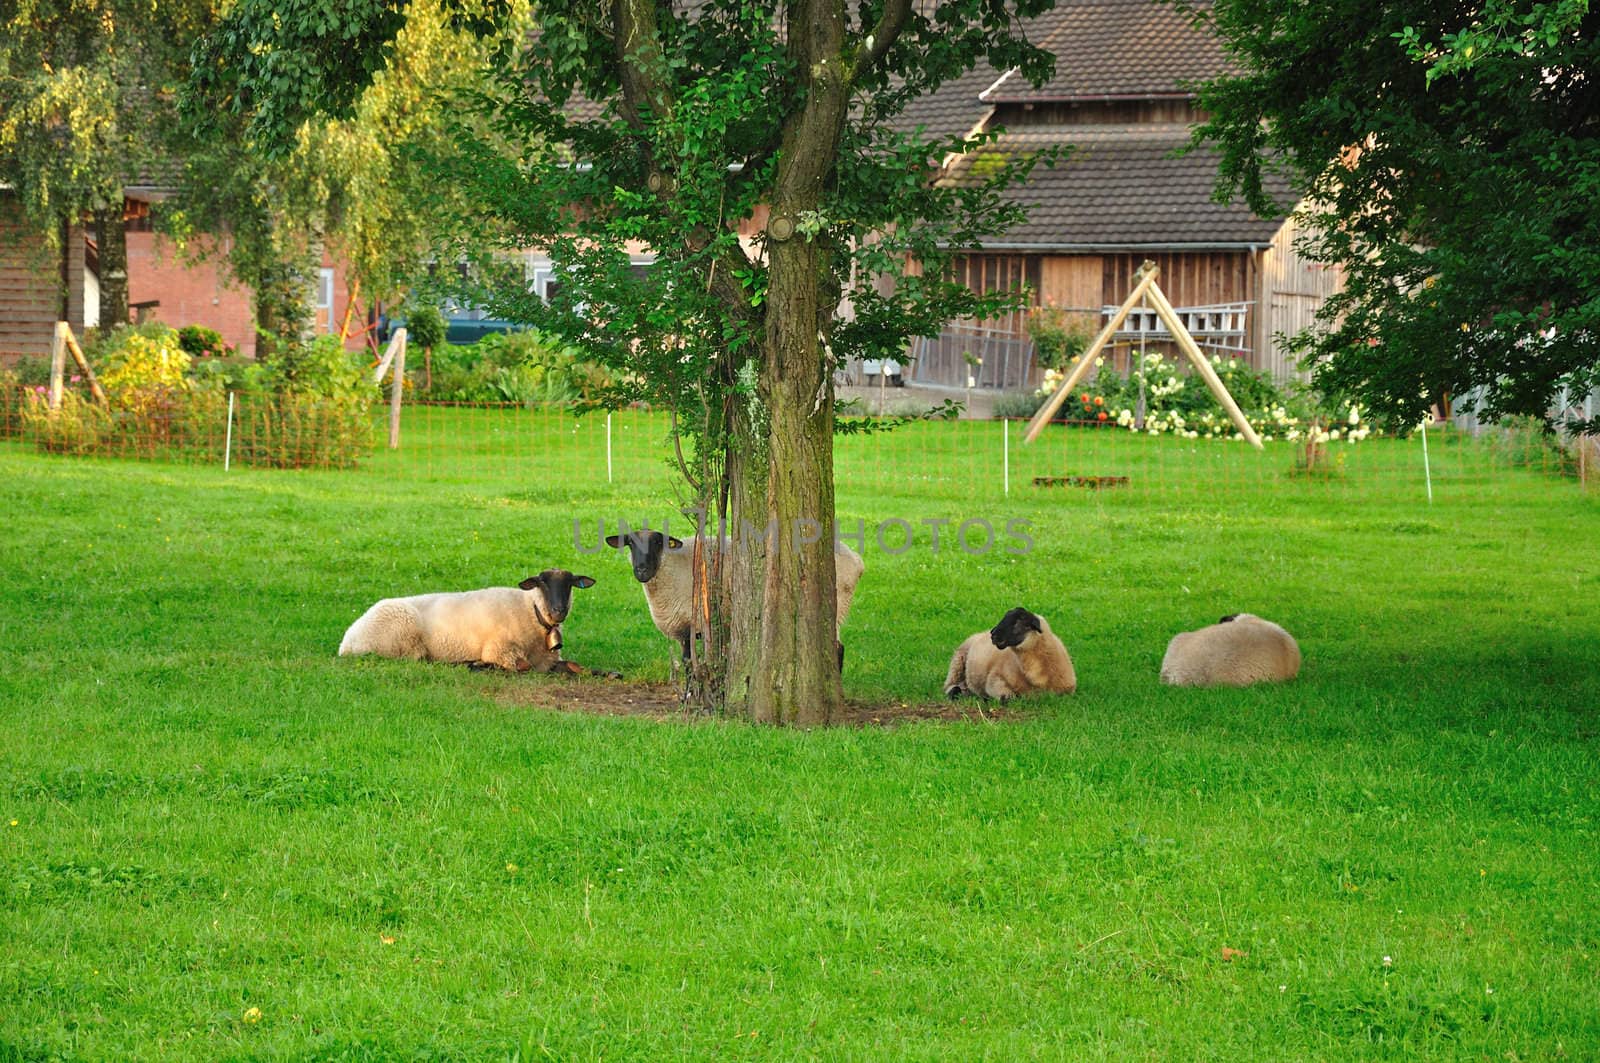 Sheeps are grazing in the backyard in a small Swiss village.